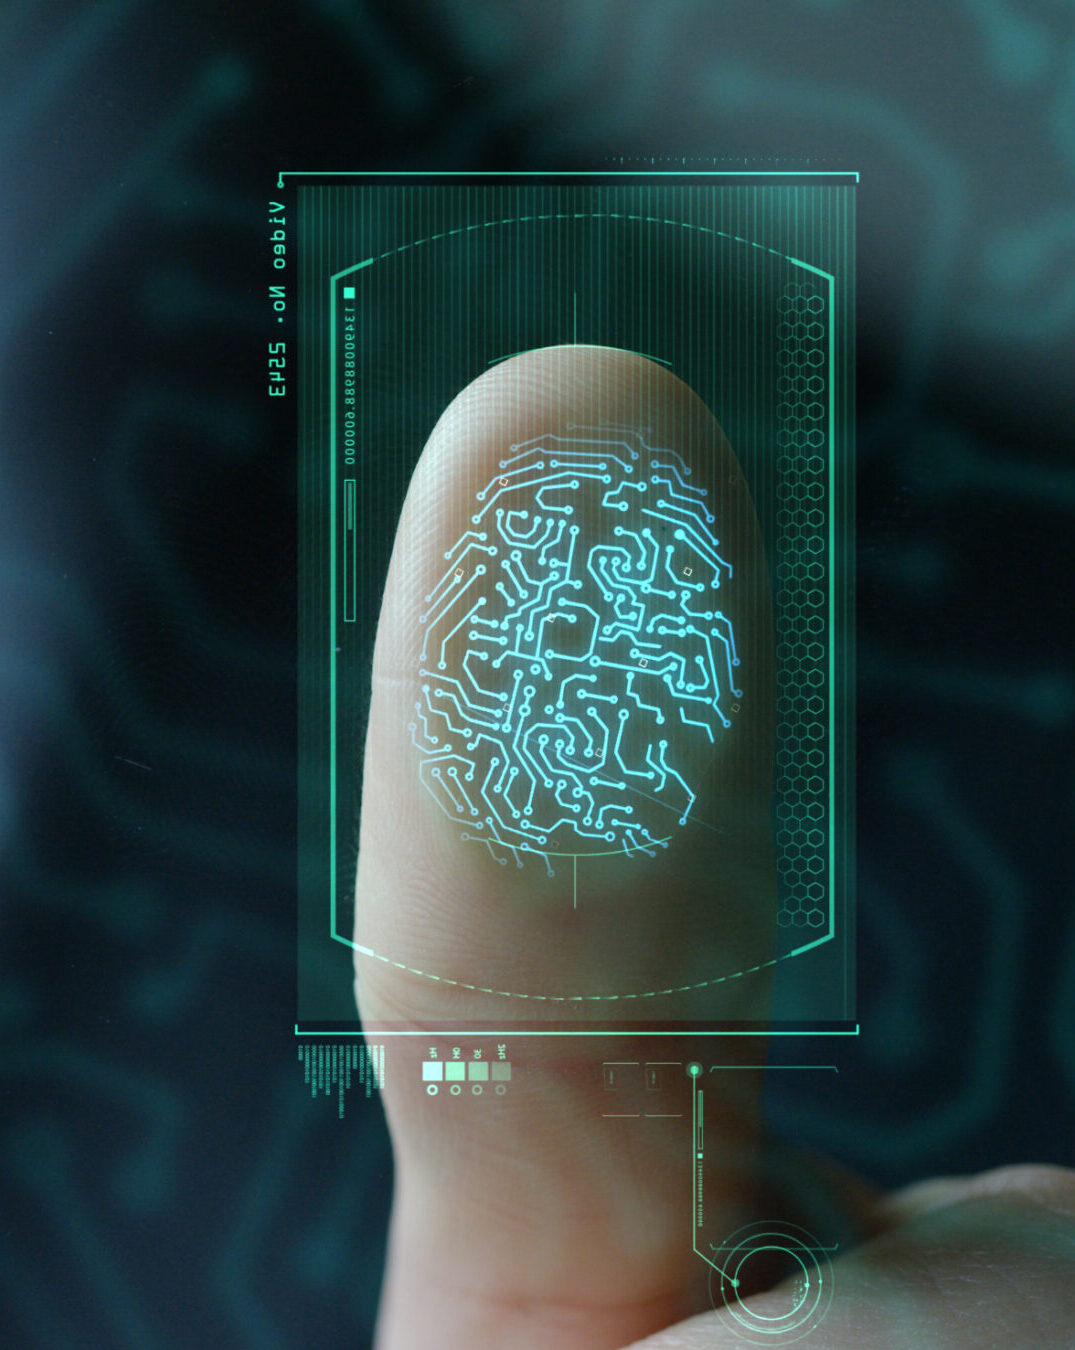 Businessman,Scan,Fingerprint,Biometric,Identity,And,Approval.,Concept,Of,The